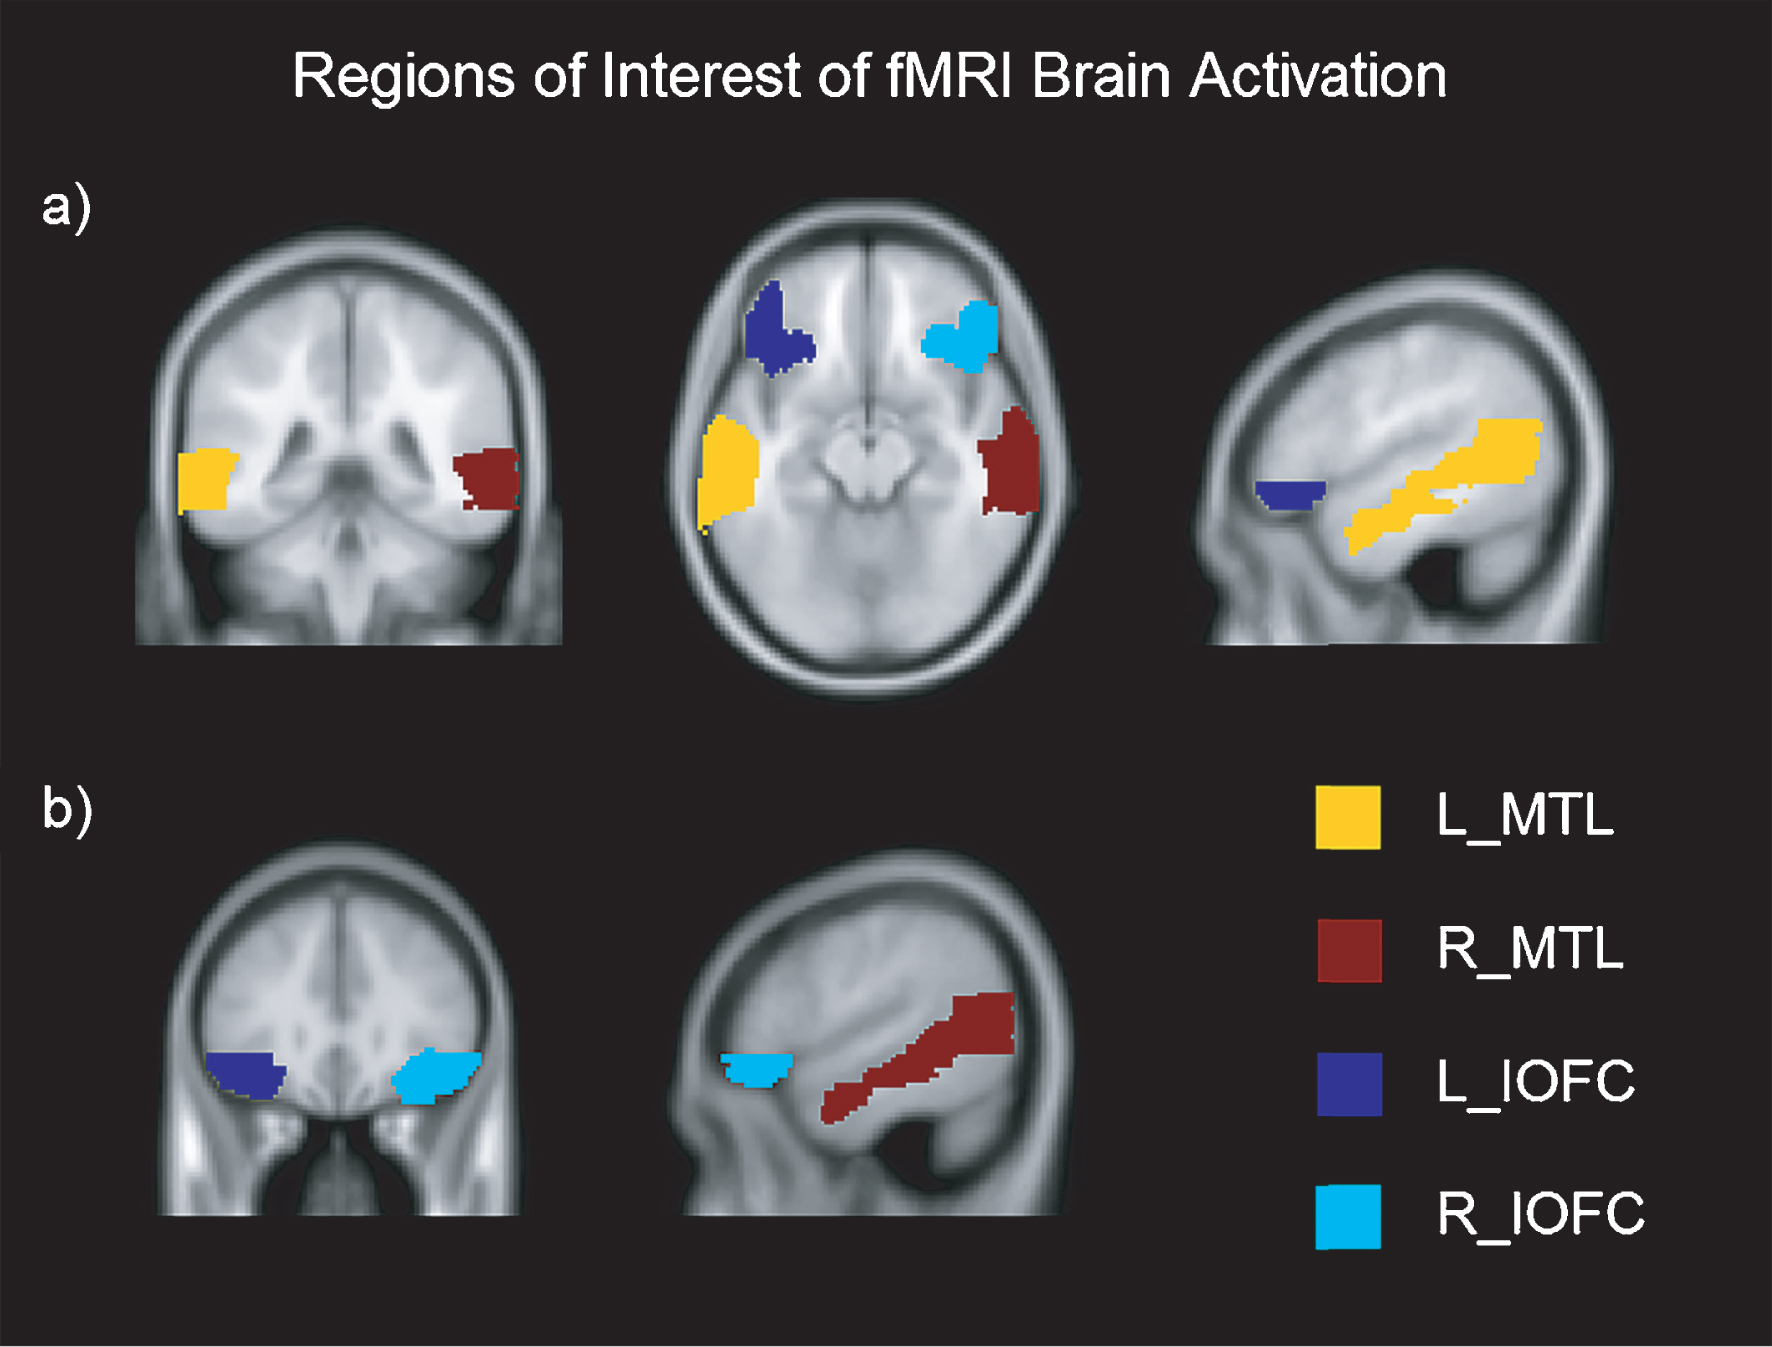 Regions of Interest of fMRI brain activation in axial, coronal and sagittal view. Montreal Neurological Institutes (MNI) template coordinates for a): x = –50.2 y = –40.8 z = –13.5. MNI for b): x = 53.7 y = 31 z = –12.5. L = Left; R = Right; MTL = Medial Temporal Lobe; IOFC = Inferior Orbitofrontal Cortex.